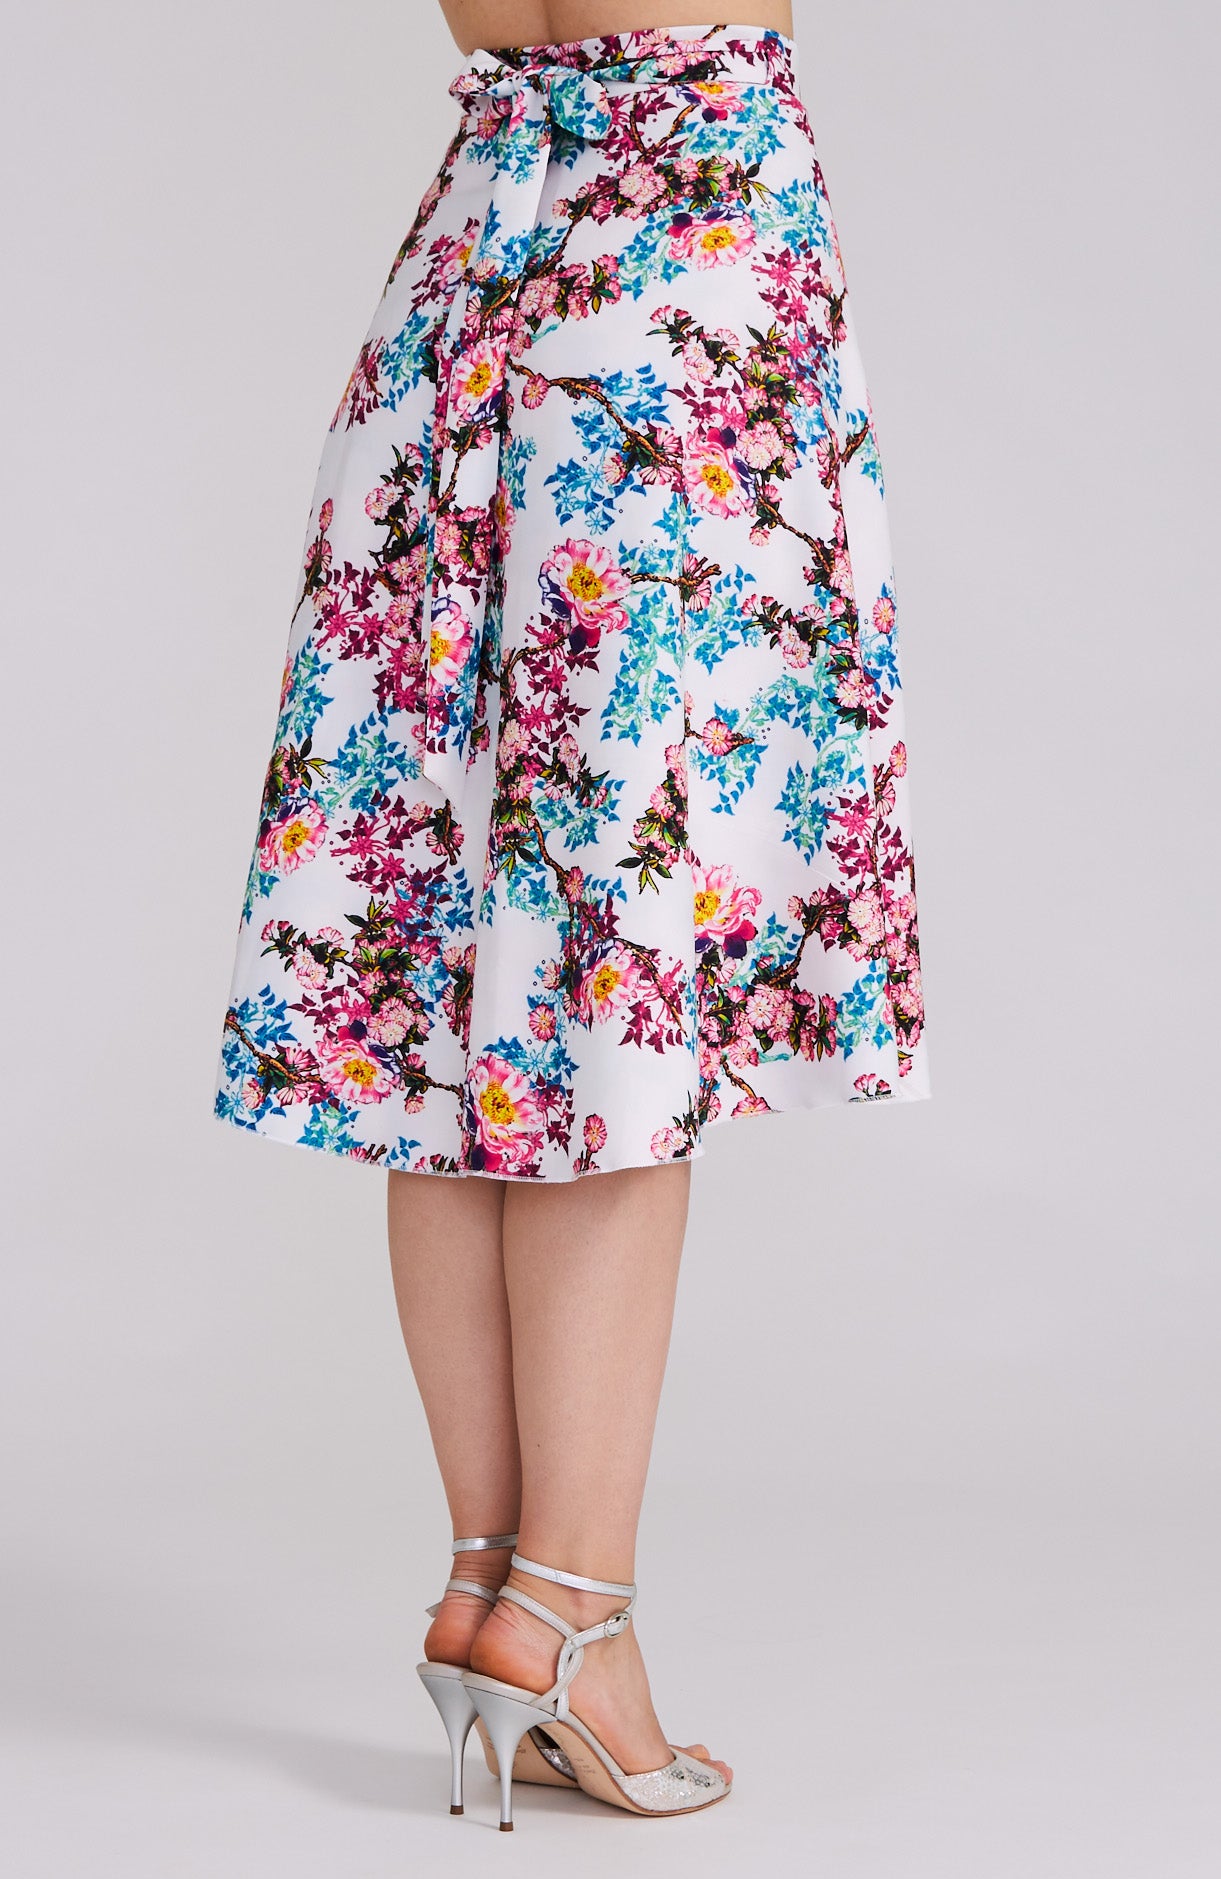 COCO - Wrap Skirt in Vivid Roses